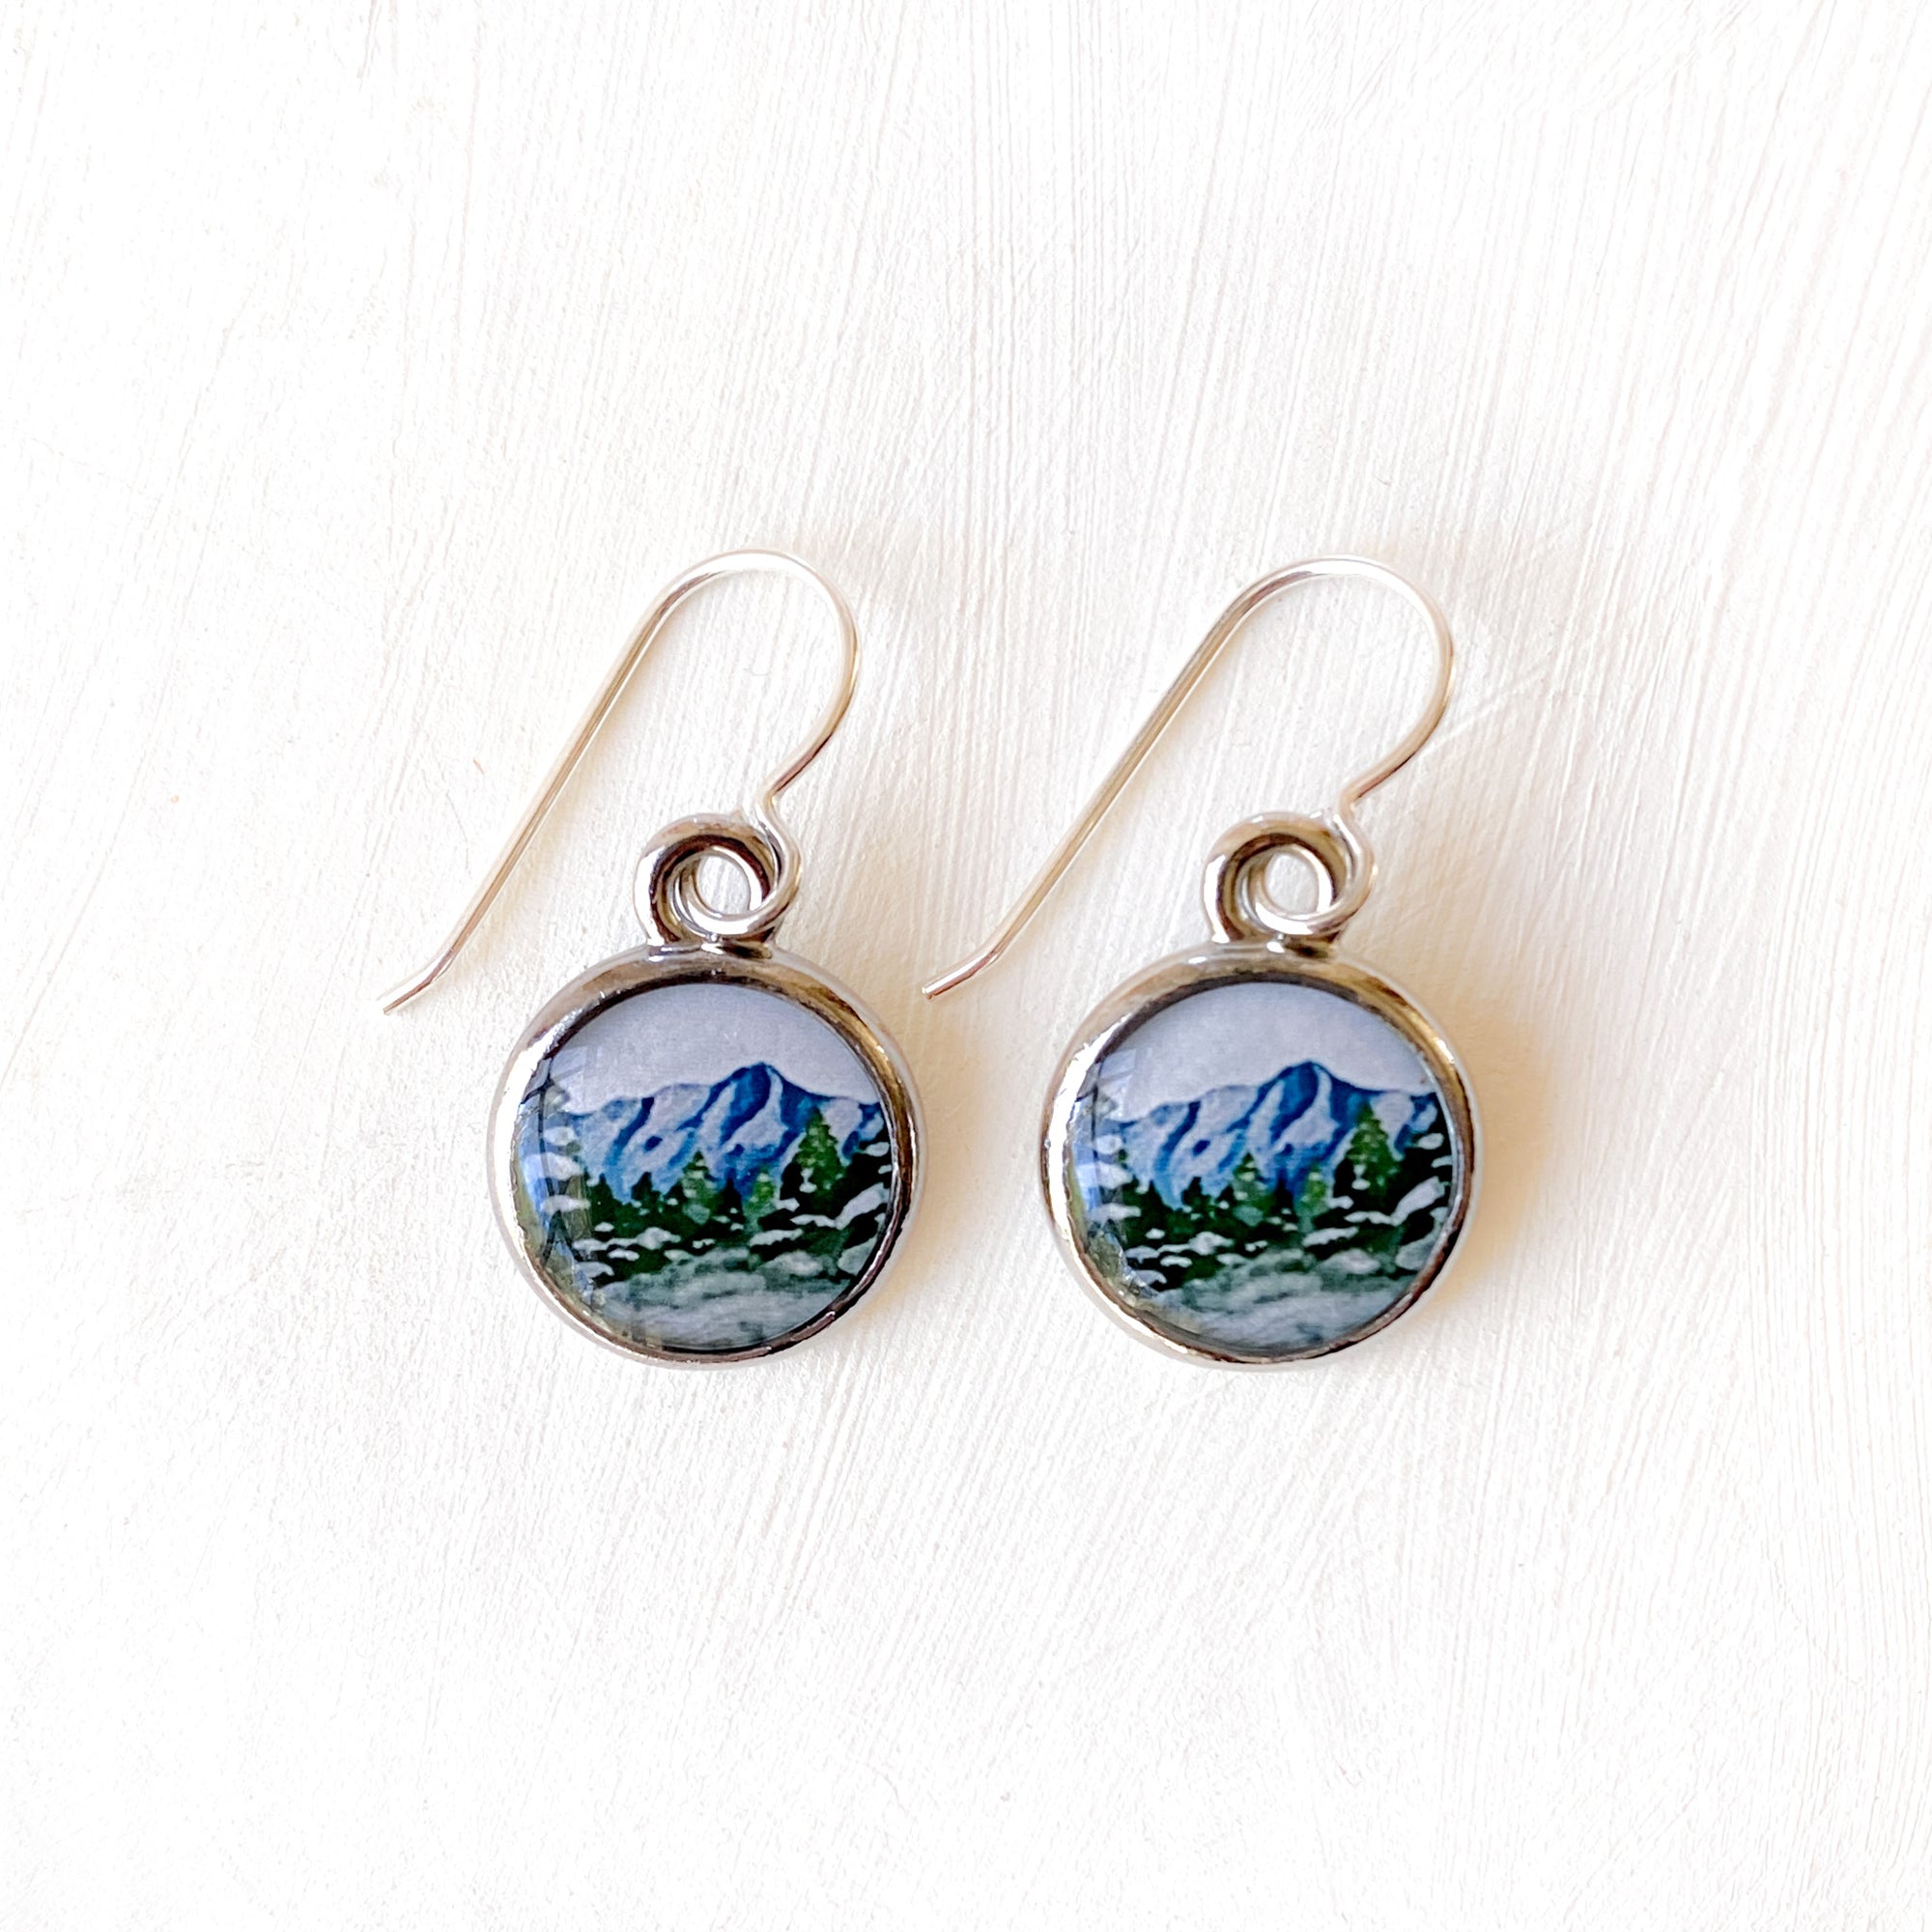 a pair of earrings with a picture of a mountain